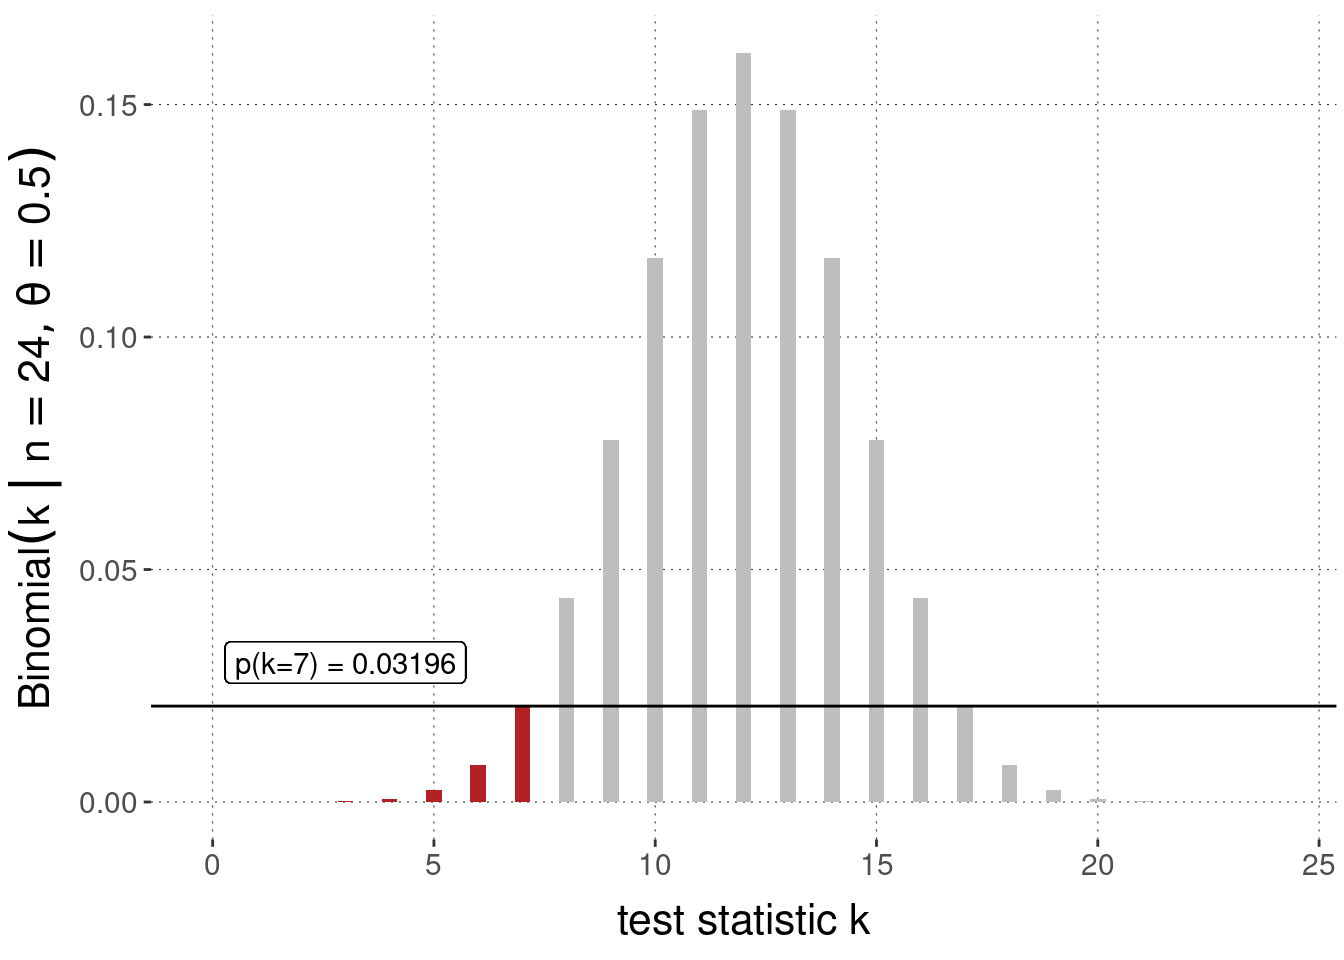 Sampling distribution (Binomial likelihood function) and one-sided $p$-value for the observation of $k=7$ successes in $N = 24$ coin flips, under the assumption of a null hypothesis $\theta = 0.5$ compared against the alternative hypothesis $\theta < 0$.